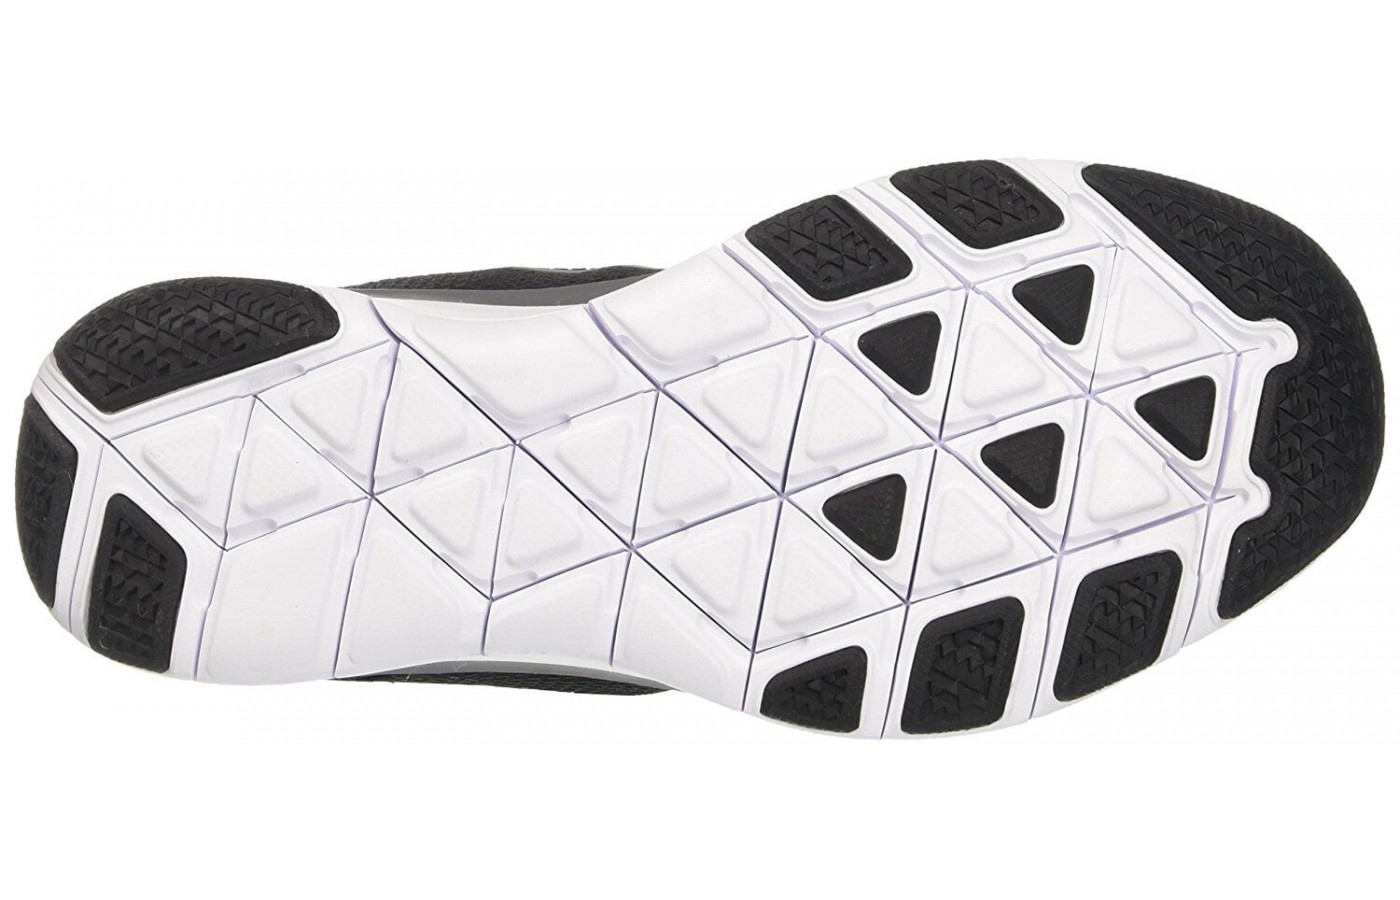 The Nike Free Trainer V7 has a rubber outsole